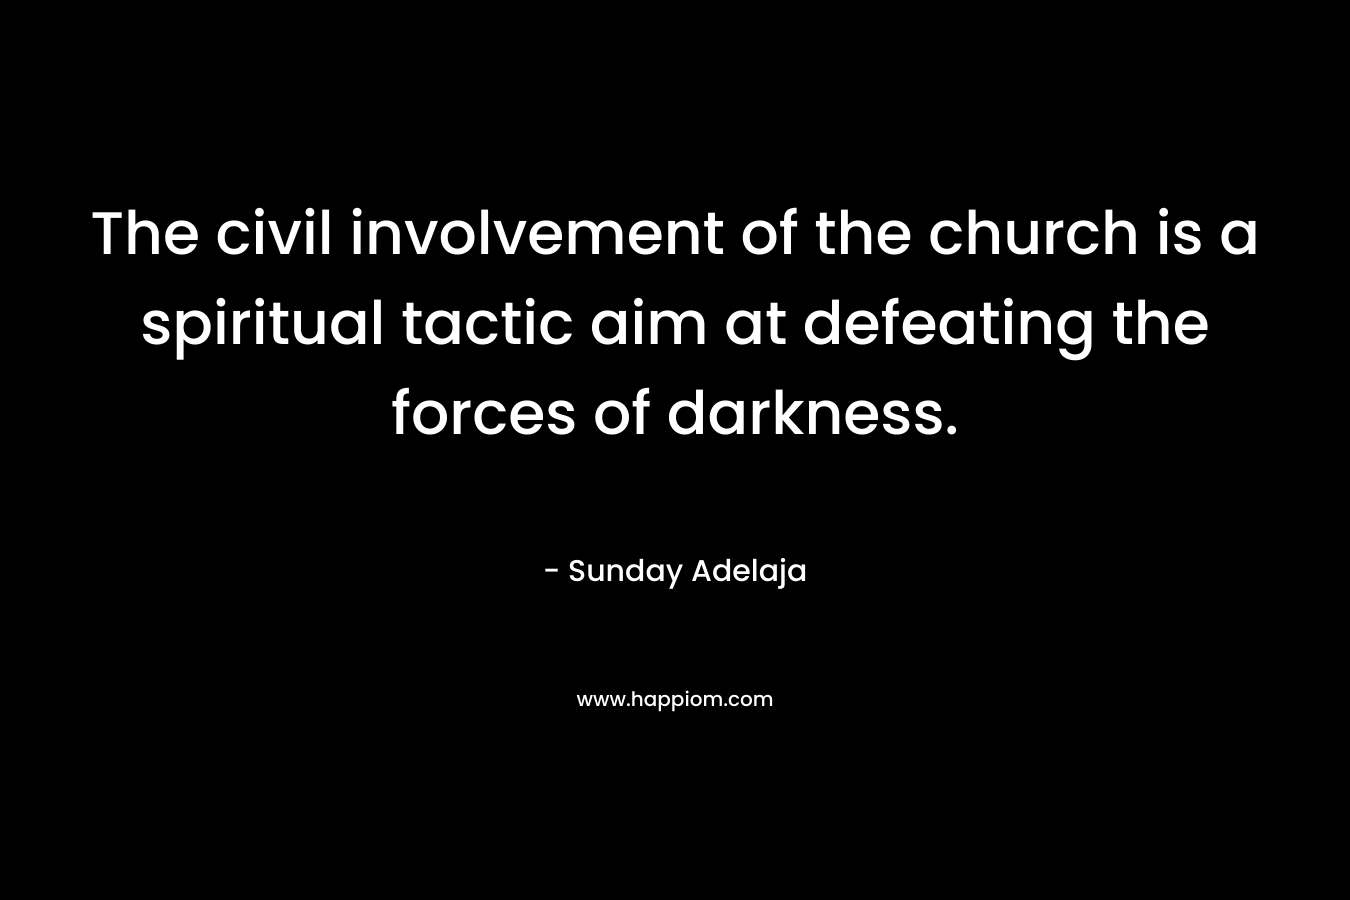 The civil involvement of the church is a spiritual tactic aim at defeating the forces of darkness. – Sunday Adelaja